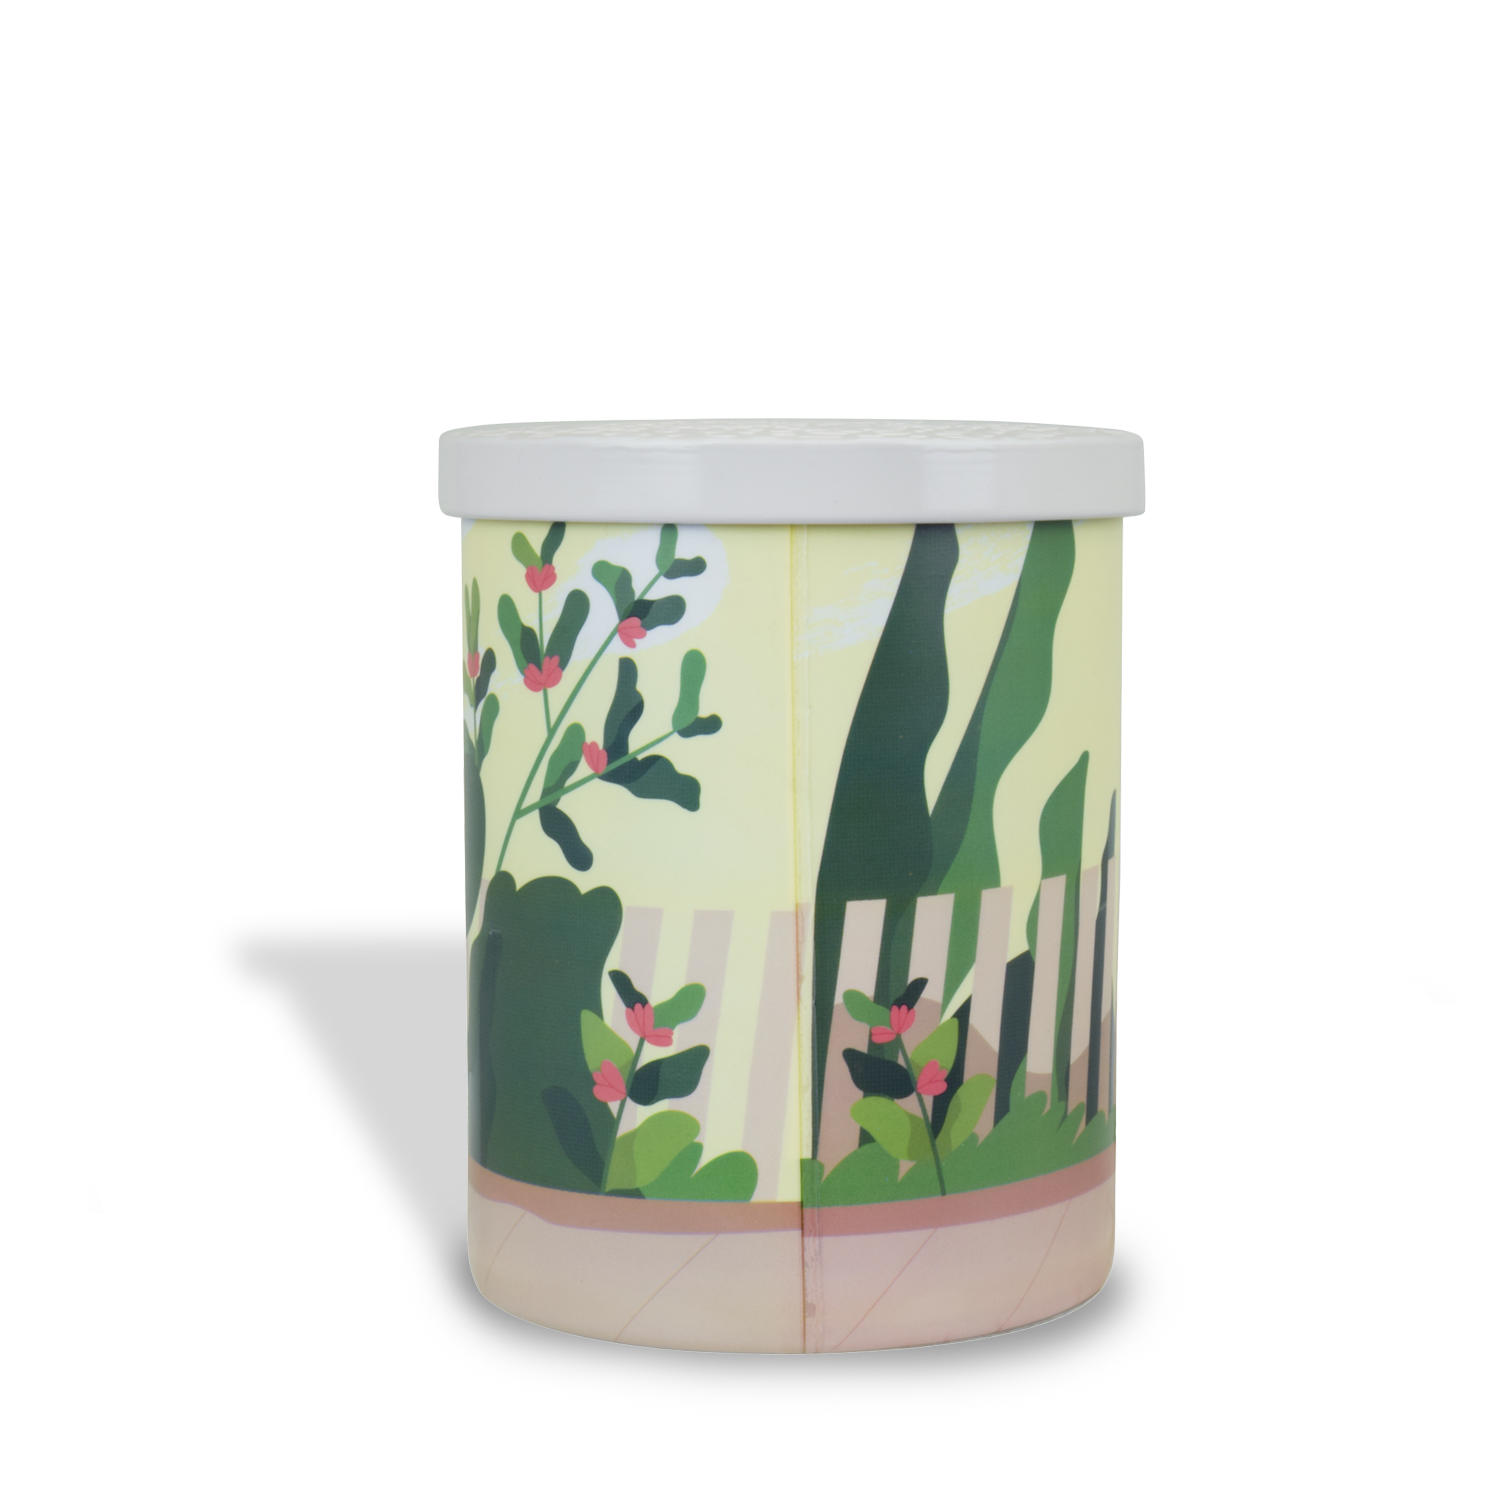 A white trash can with a garden design on it, perfect for morning walks with your dog and to mask any unpleasant pet odor is the Morning Stroll Scented Jar Candle (14 oz) from the Tuscany Candle Pet Odor Control Collection.